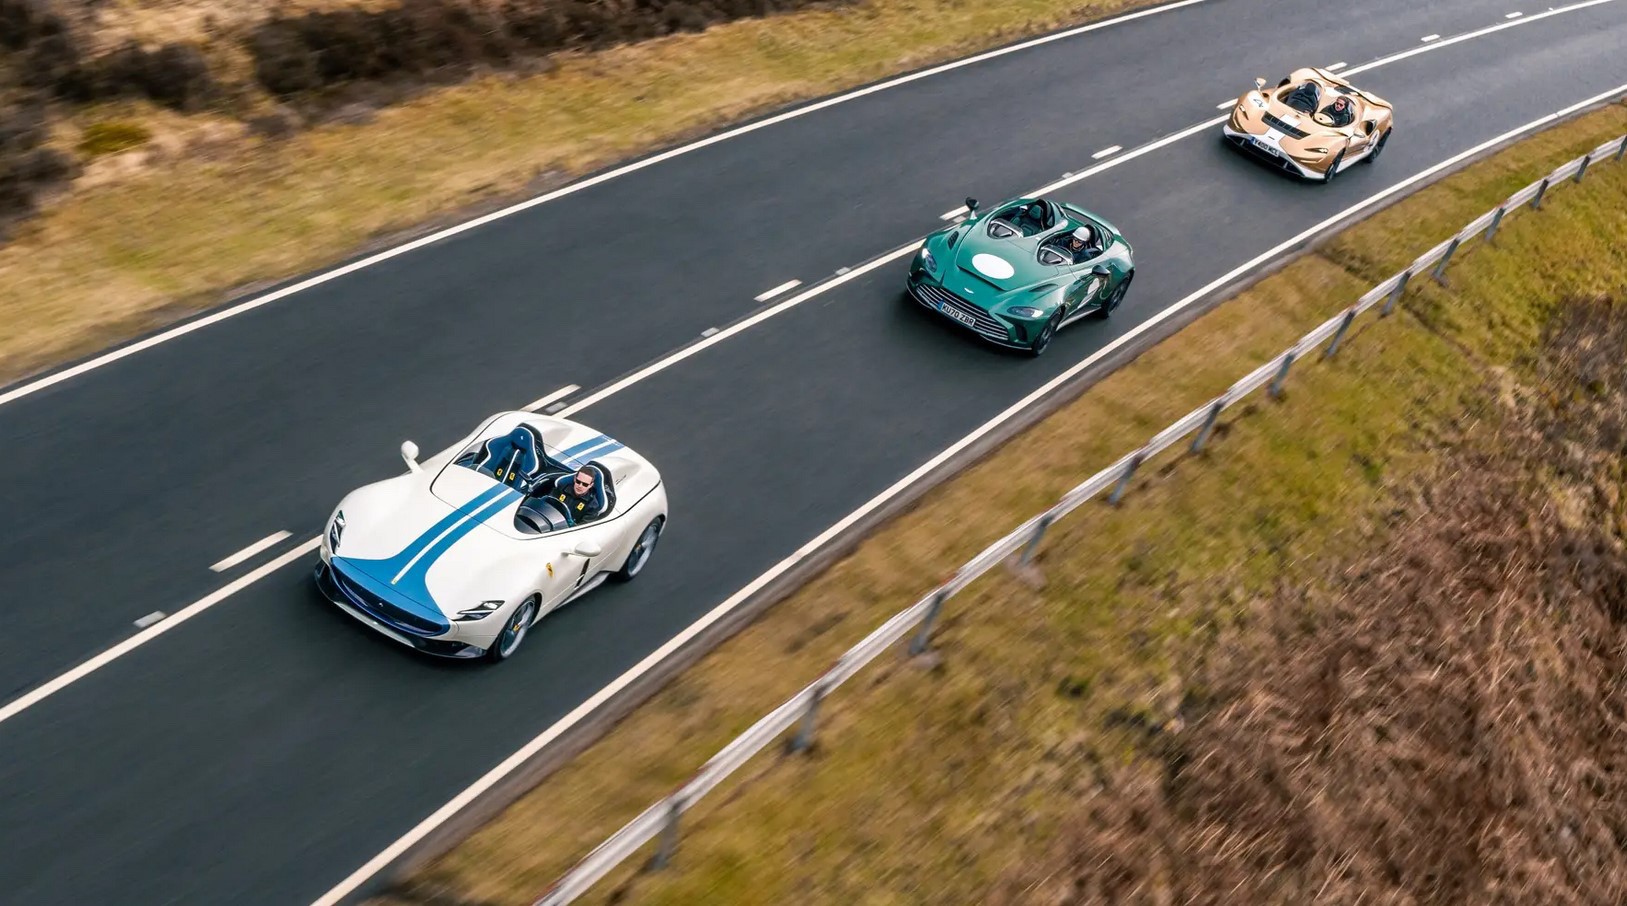 Open-air fun with roofless supercars